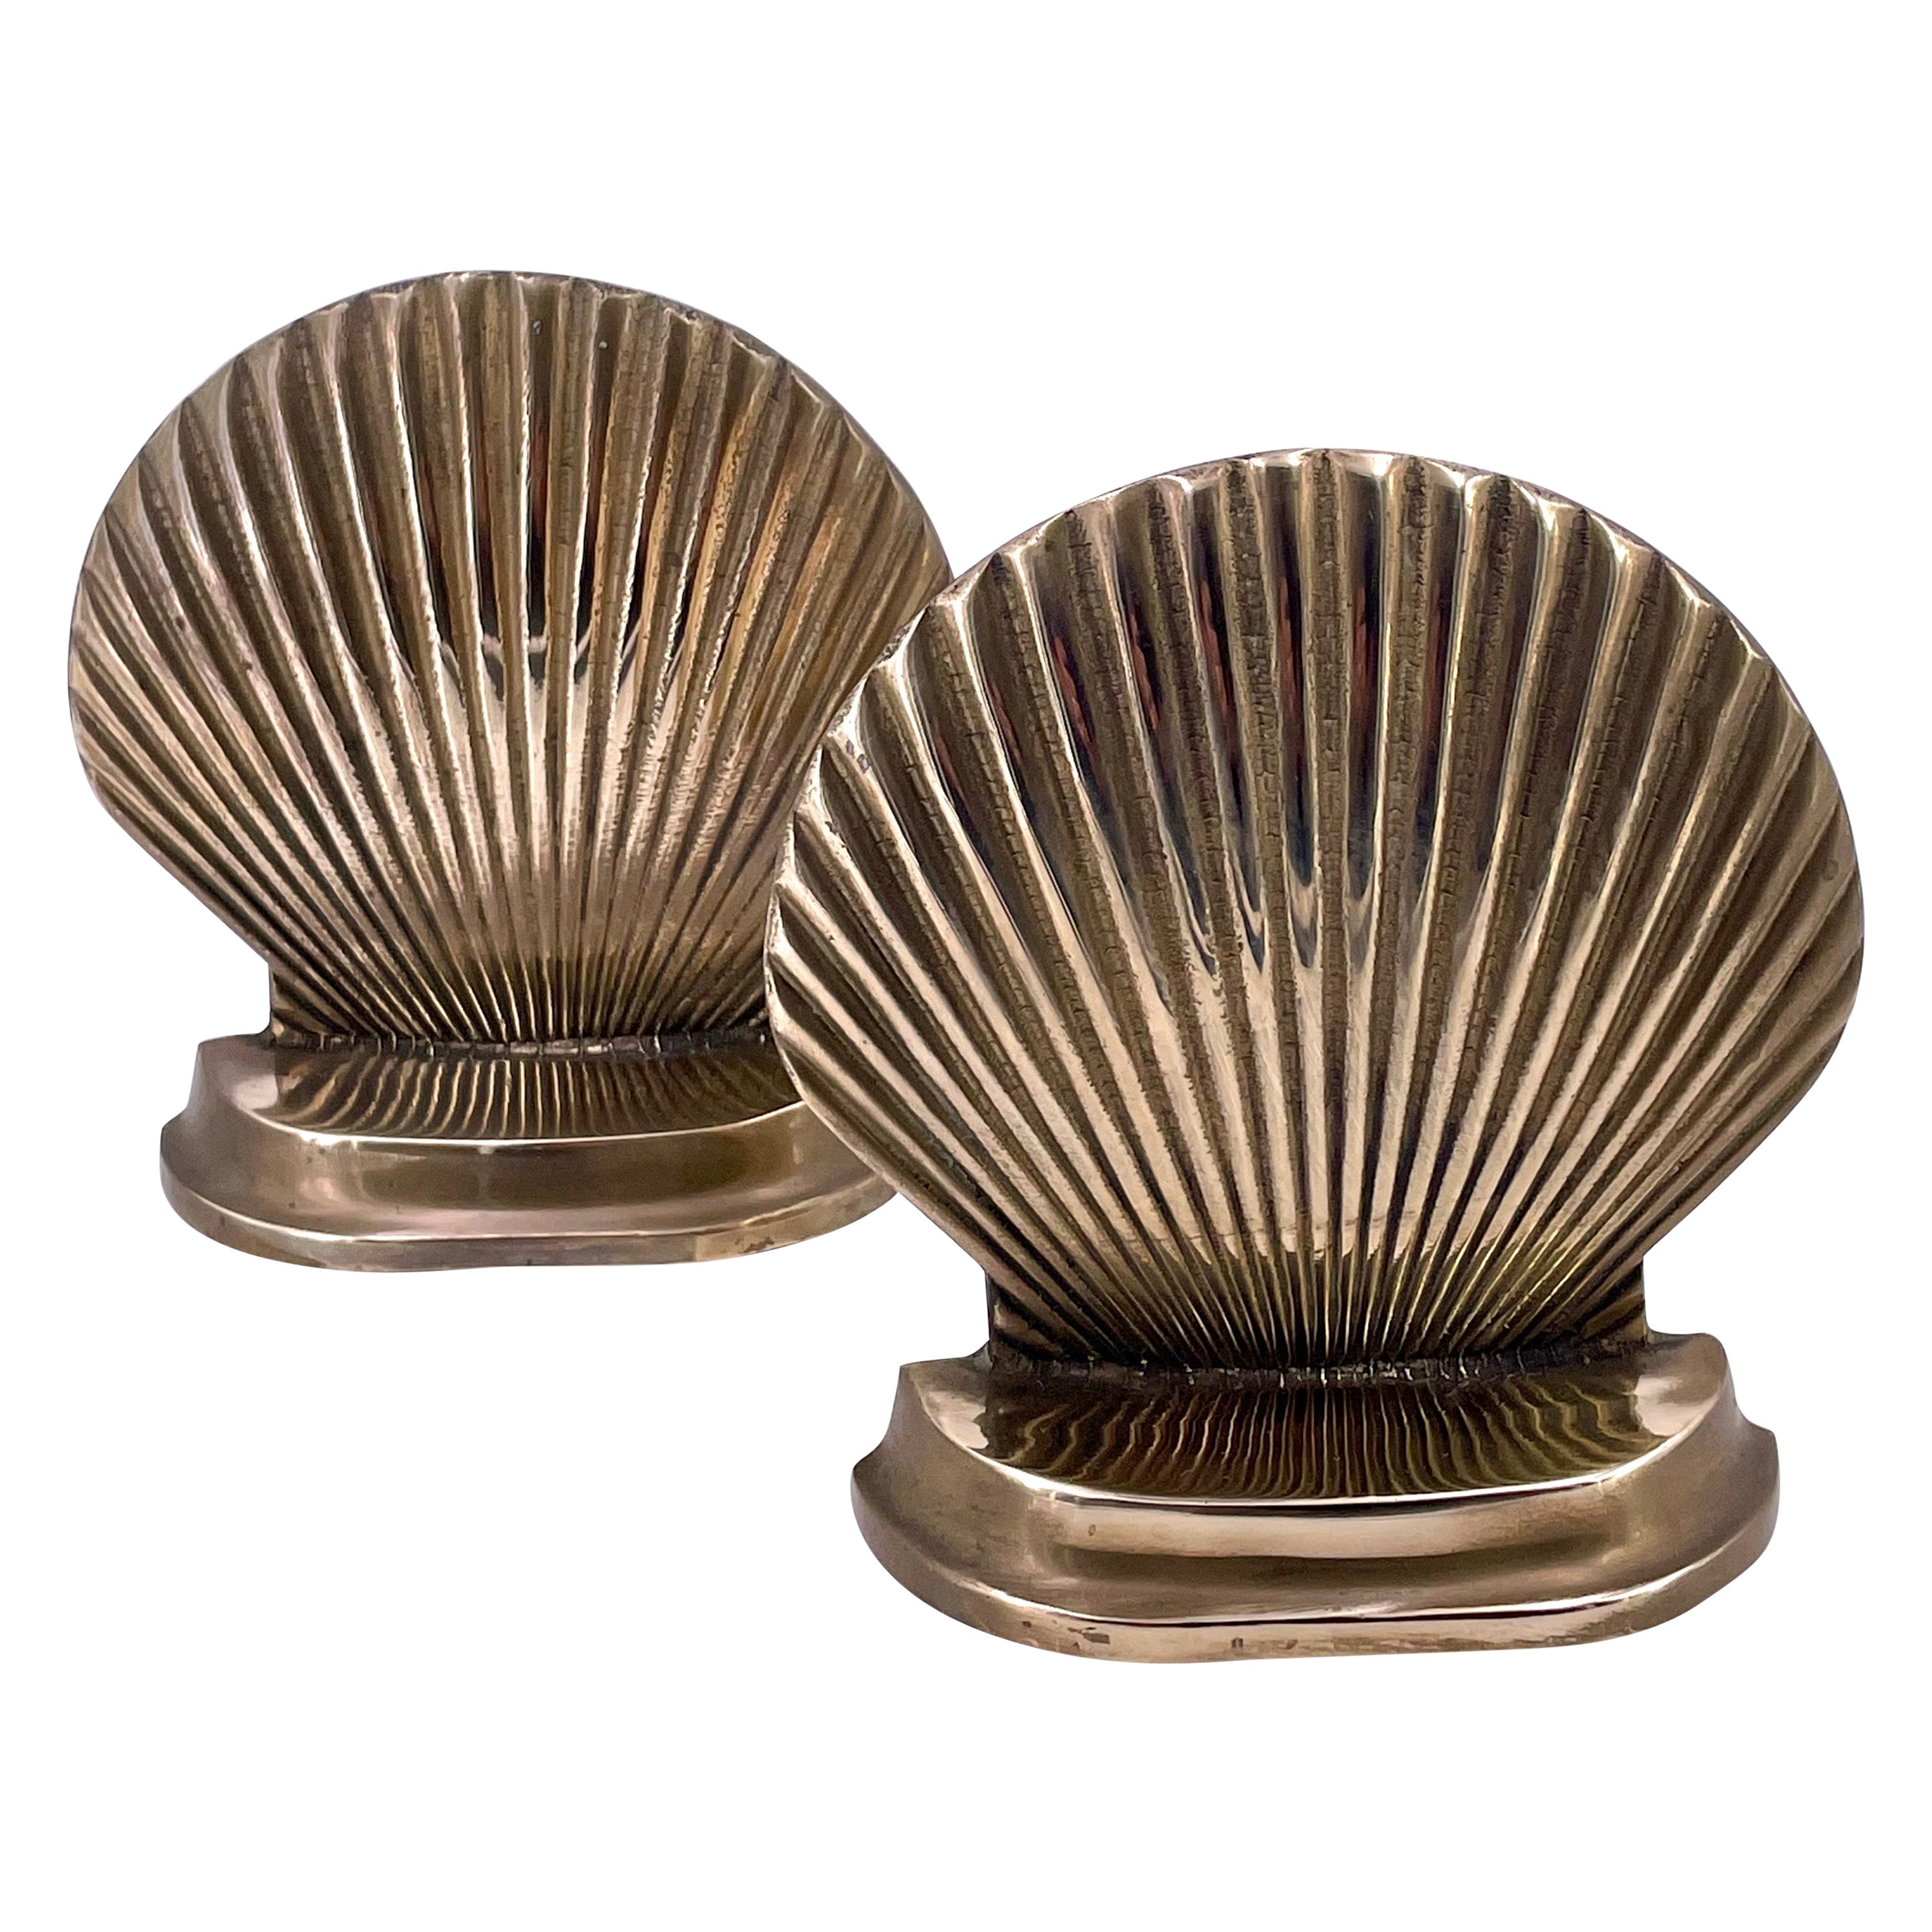 Vintage Hollywood Regency Polished Brass Sea Shell Sculpture Pair of Bookends